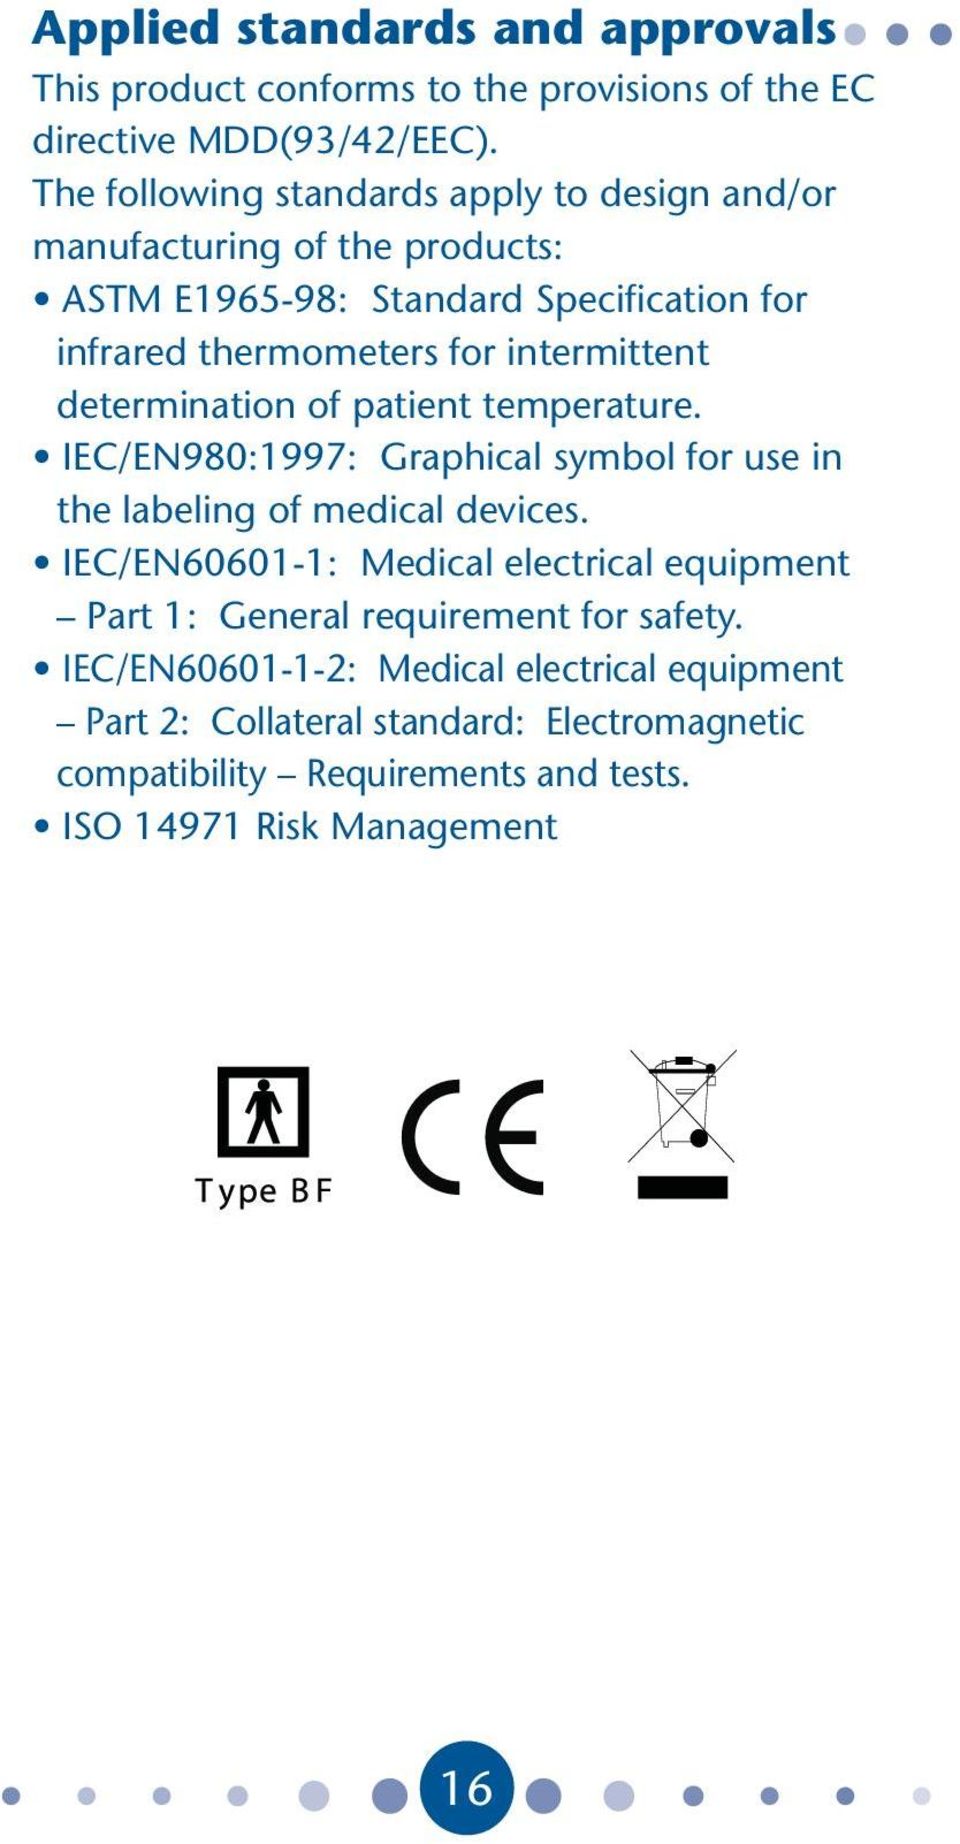 intermittent determination of patient temperature. IEC/EN980:1997: Graphical symbol for use in the labeling of medical devices.